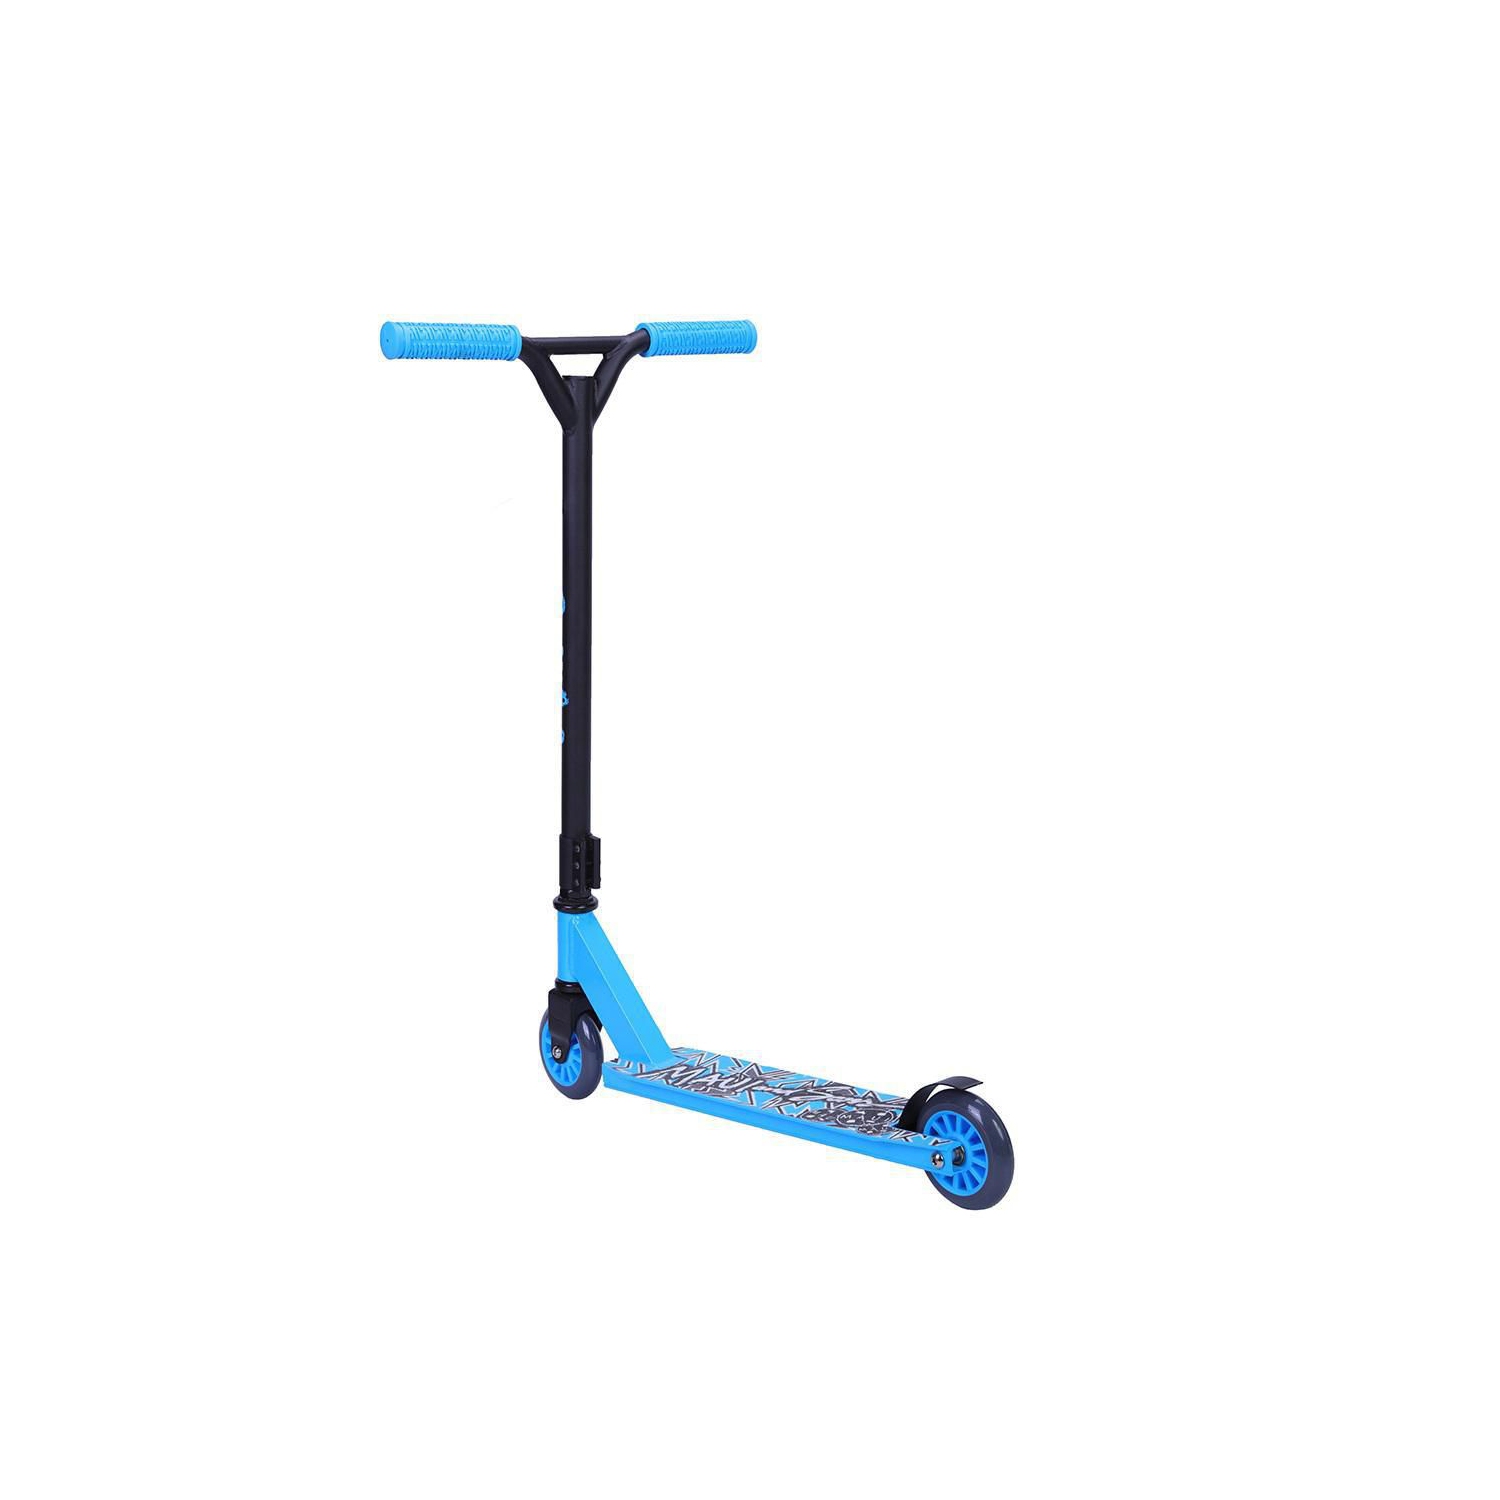 Maui And Sons Destroyer Kids Stunt Scooter Blue/White 